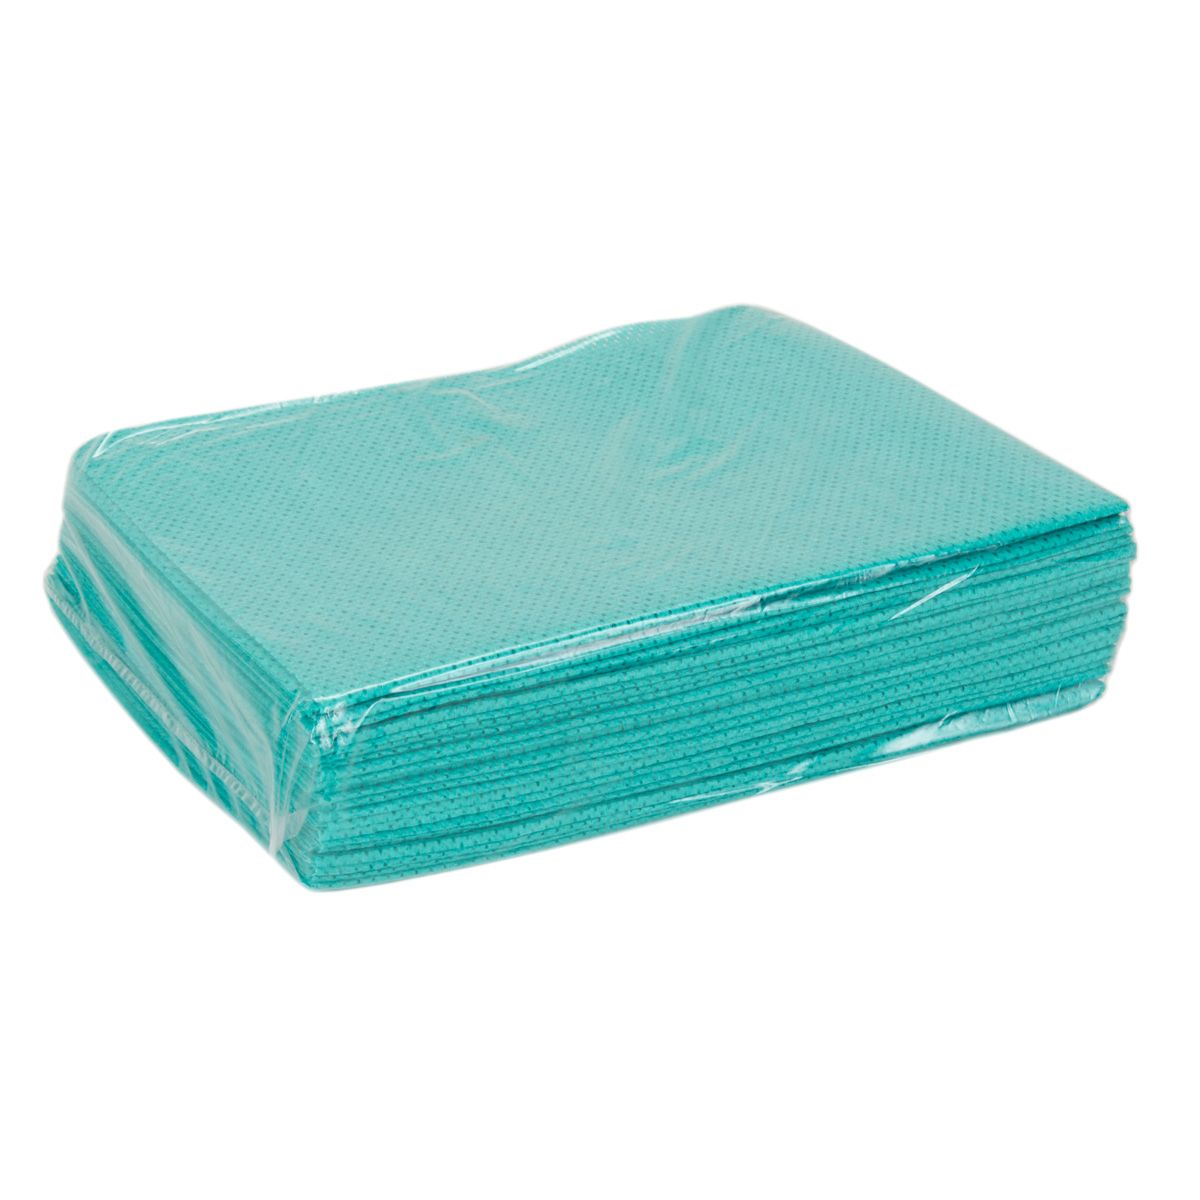 Harrison Wipes Heavy Weight Cloths 75gsm White Polyester Cloths for Cleaning, Degreasing of 25